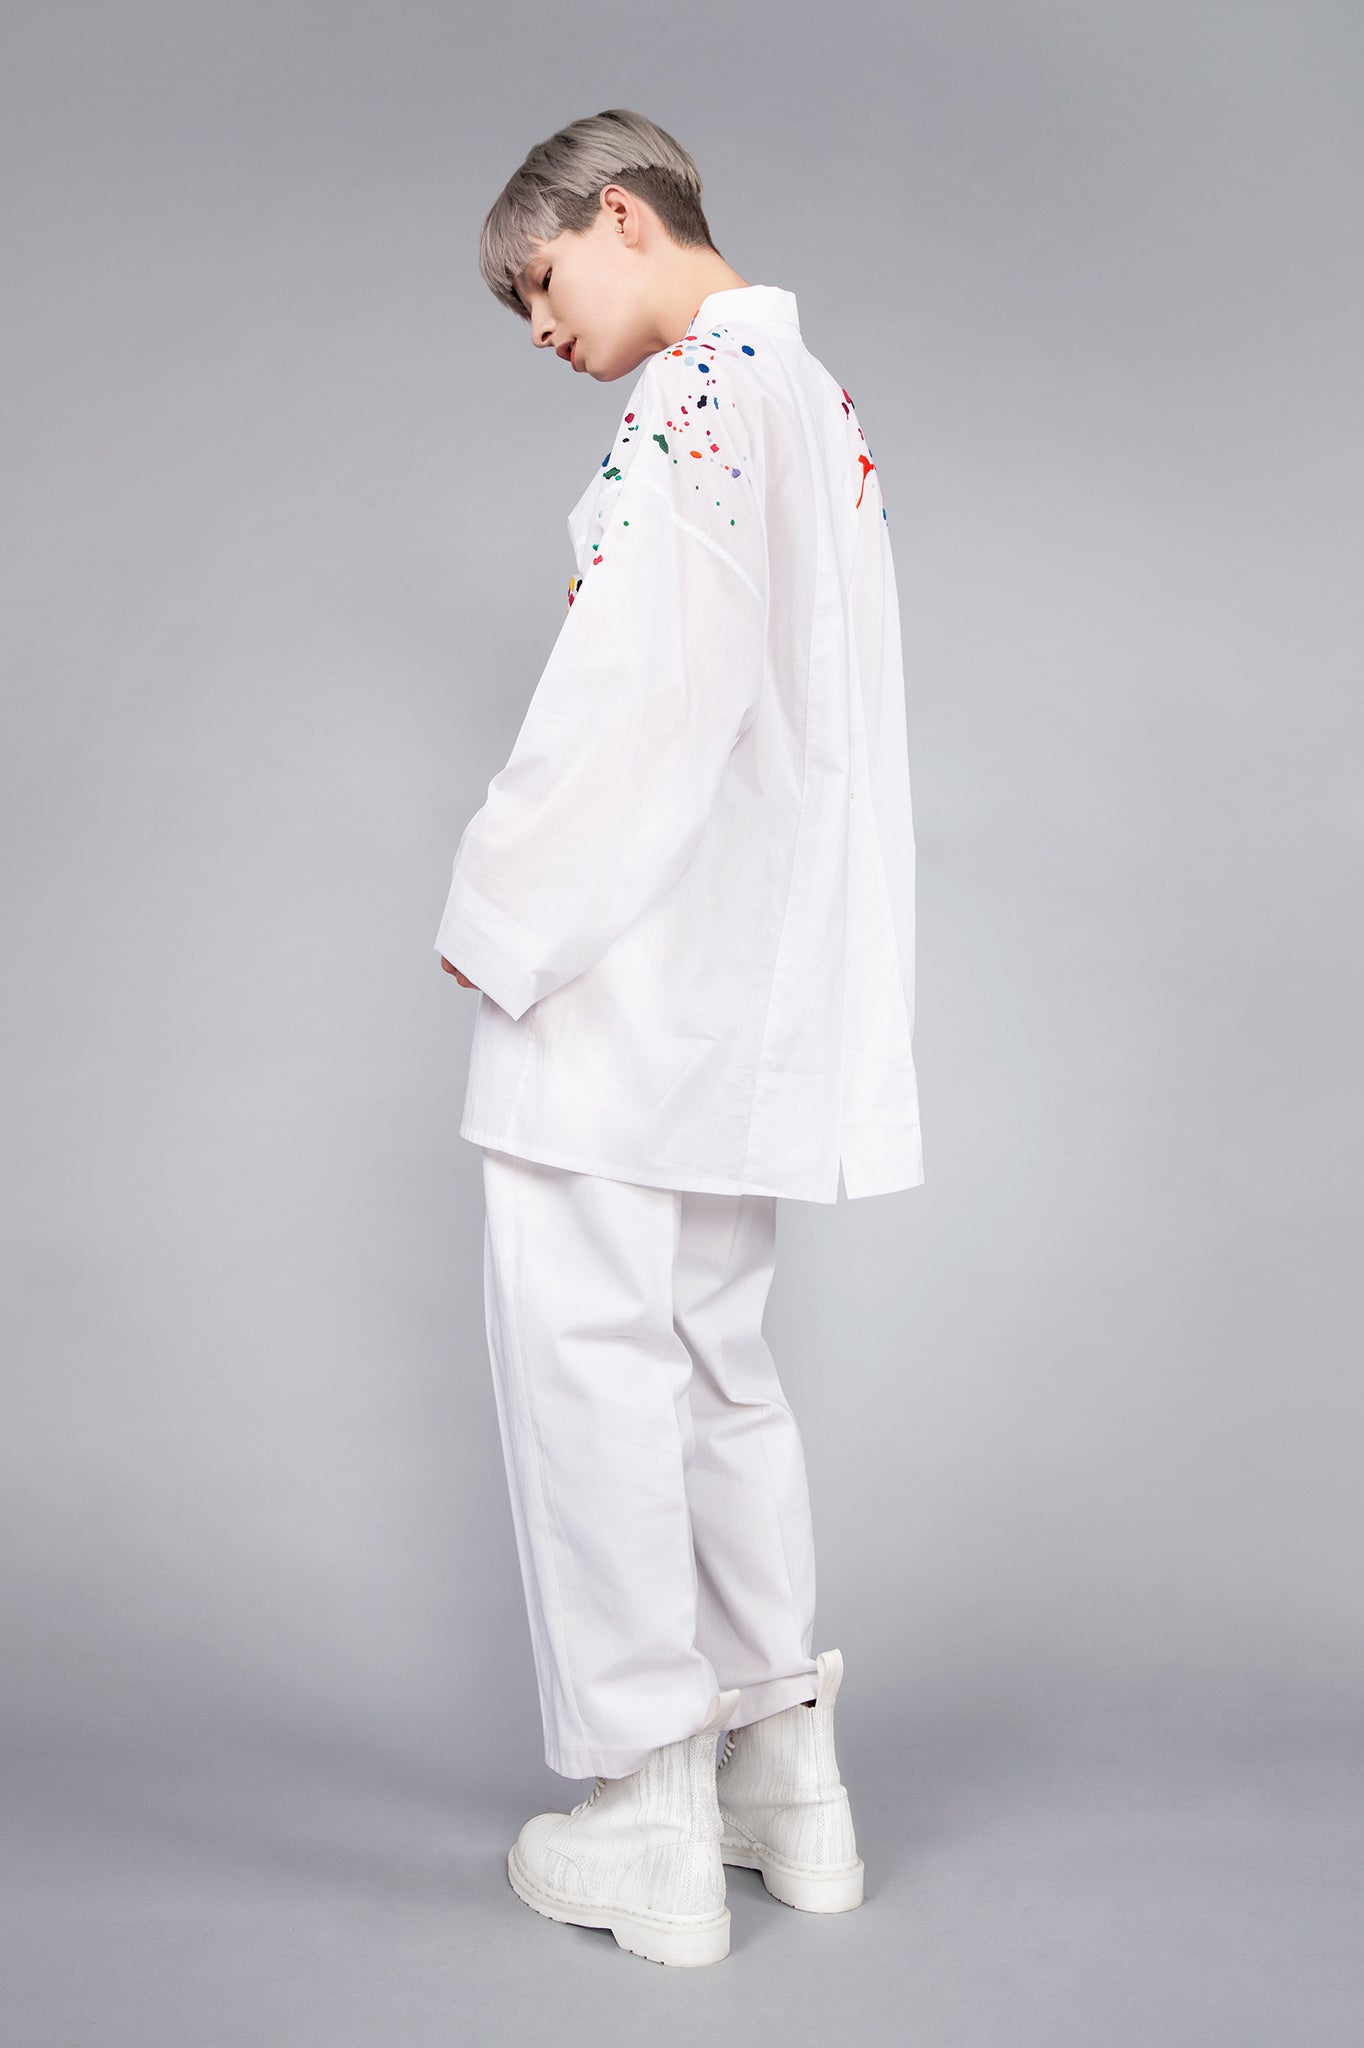 Colourful embroidered paint splashes on crisp white cotton 'cleave' shirt with a split back - from emerging brand CIMONE. Embellishments and overall look at echoed by Oscar de la Renta one year later in SS18 - be ahead of the trends and support new brands!